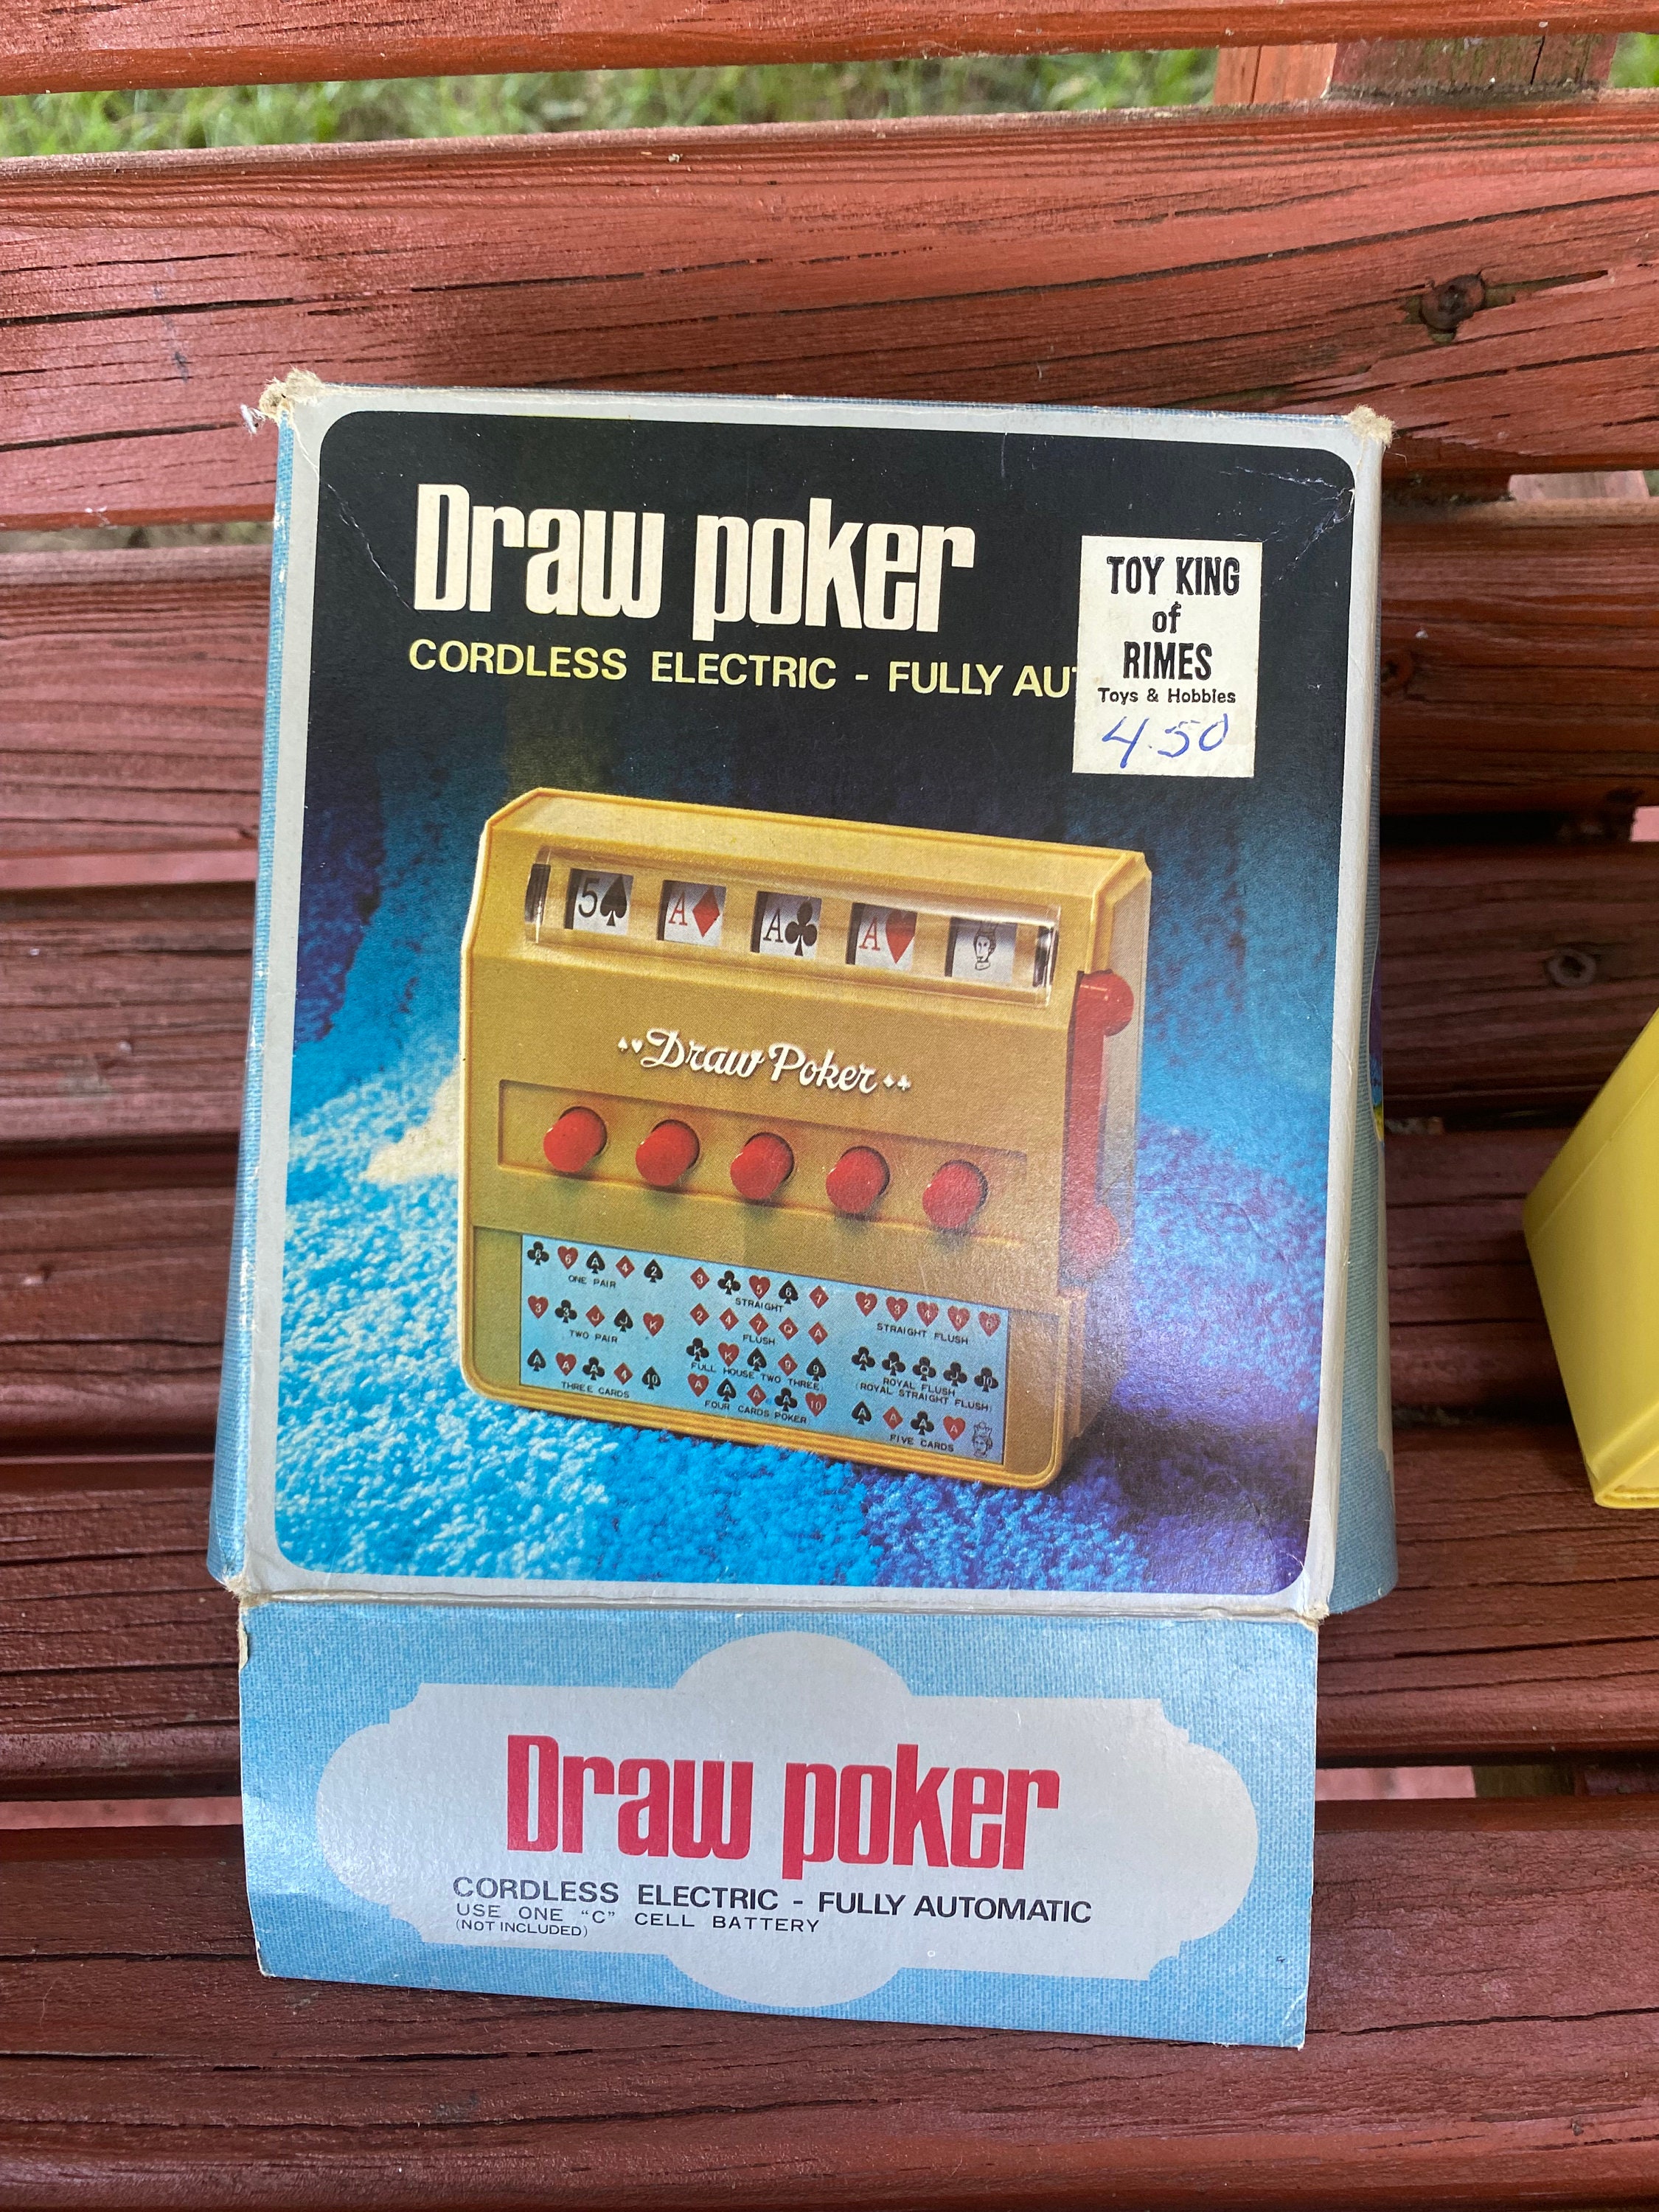 VINTAGE 1971 DRAW POKER CORDLESS ELECTRIC FULL AUTOMATIC GAME IN BOX